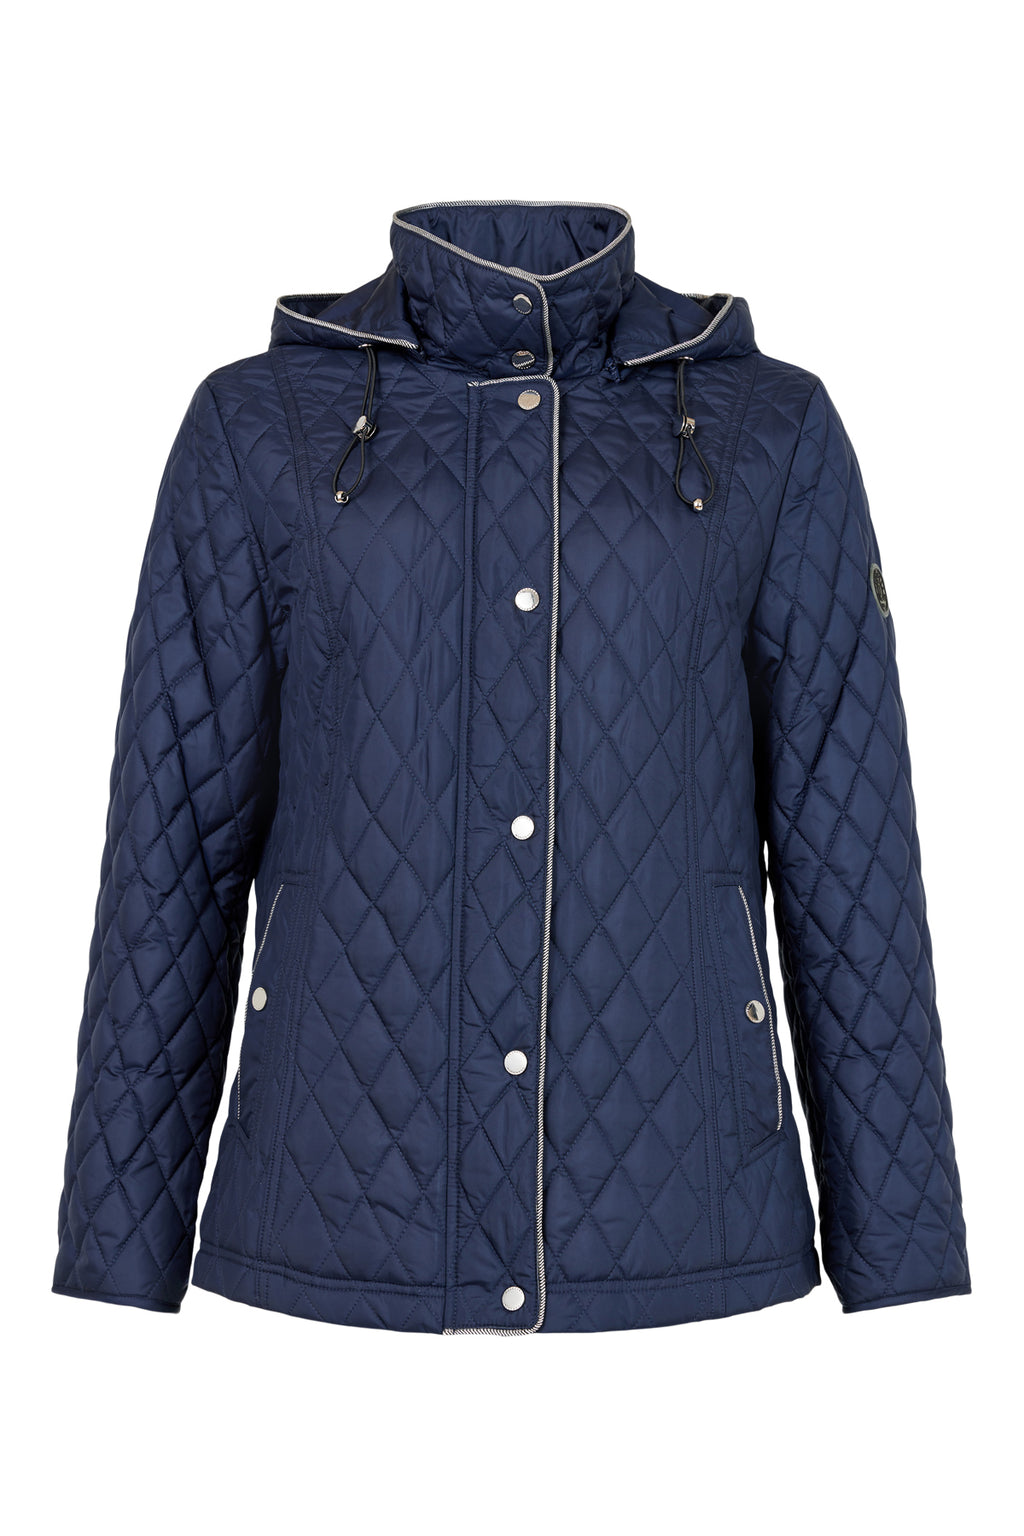 <p>Frandsen quilted jacket with detachable hood in navy</p>
<p>Product code 831-521</p>